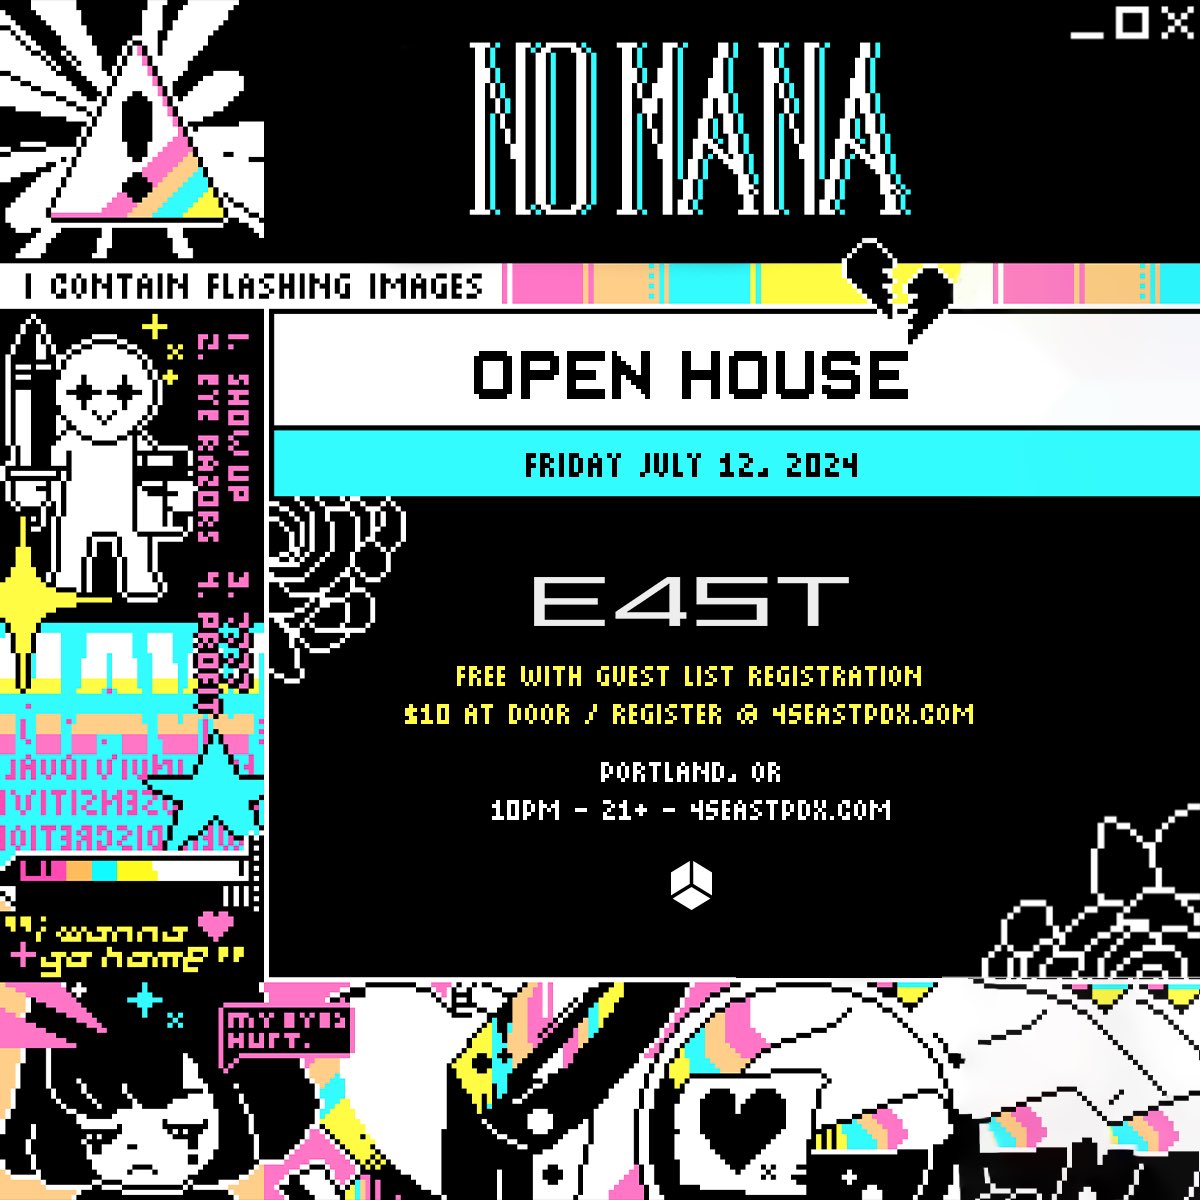 A pixelated paradise awaits! 👾 @ihavenomanas will be joining us at the club for an OPEN HOUSE party on Friday, July 12th! 🔥 Sign up on the guest list for free entry before midnight, otherwise tickets will be $10 at the door. Guest list opens Thursday at 10AM! 🔊🎶🙌🏽